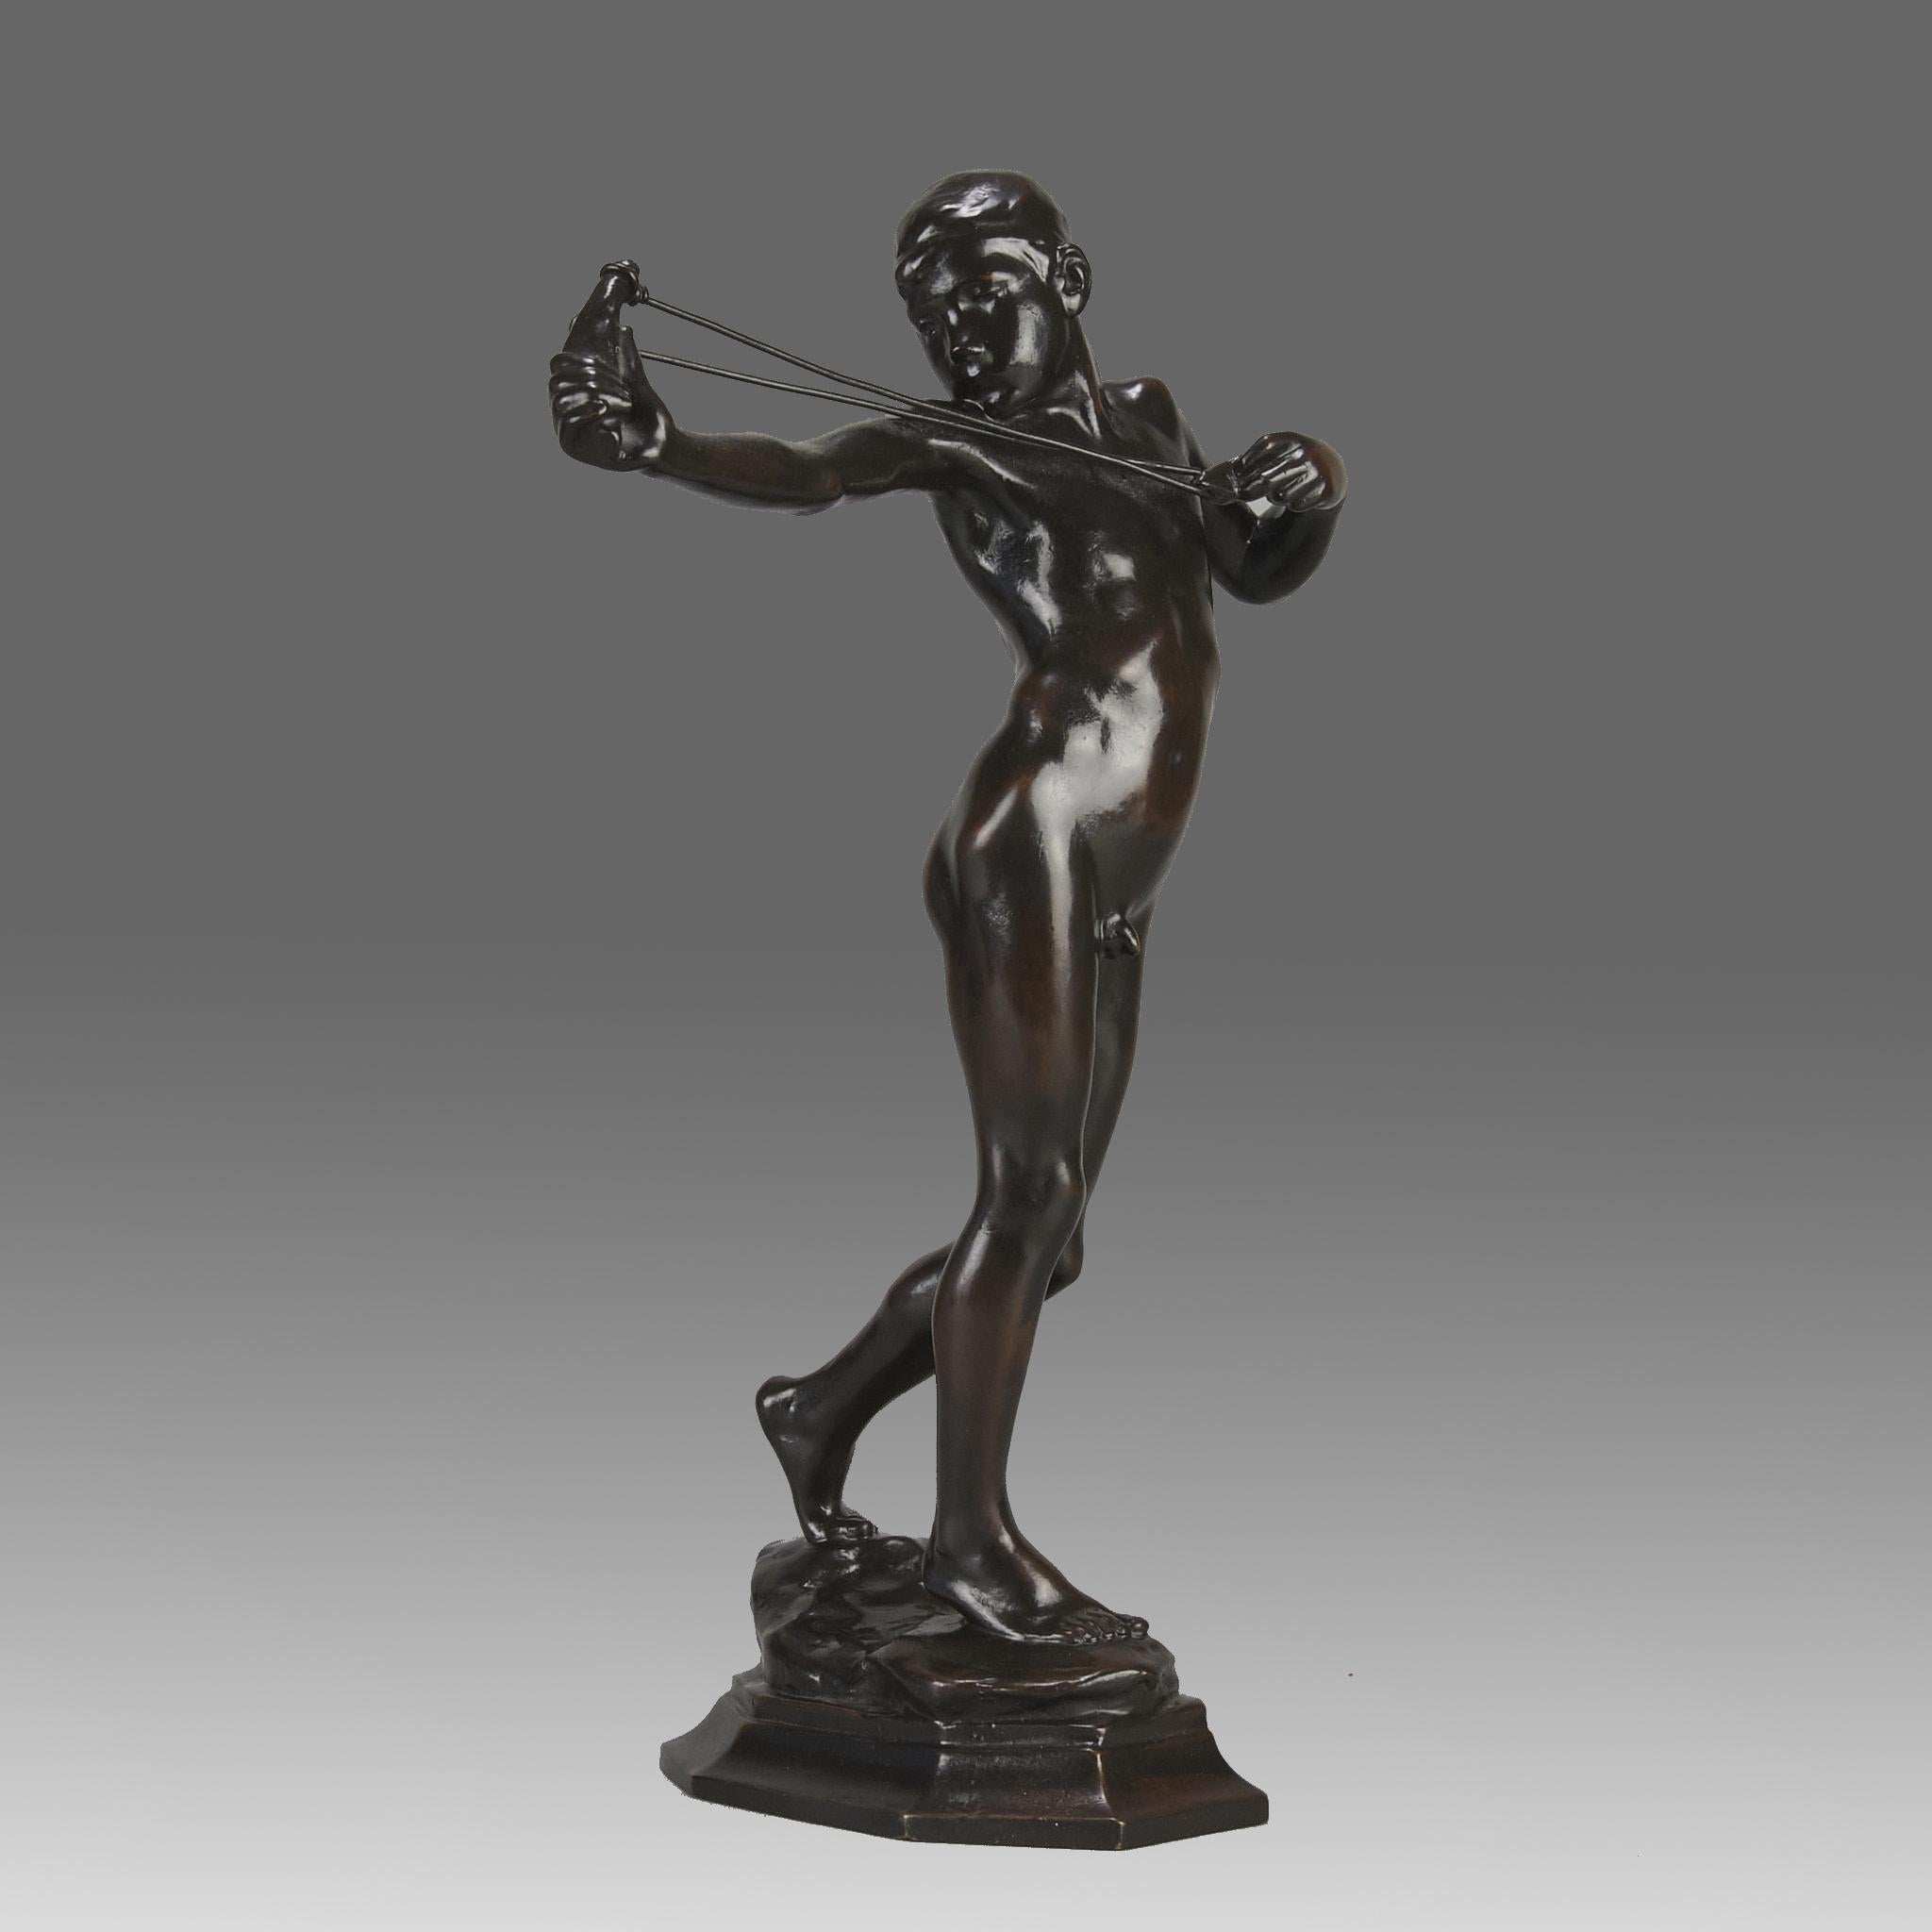 A charming and dramatic early 20th Century Art Nouveau bronze study of a standing boy aiming his catapult, signed to base. The sculpture depicts a young boy gracefully poised in the act of launching a sling. Crafted from bronze, the sculpture's